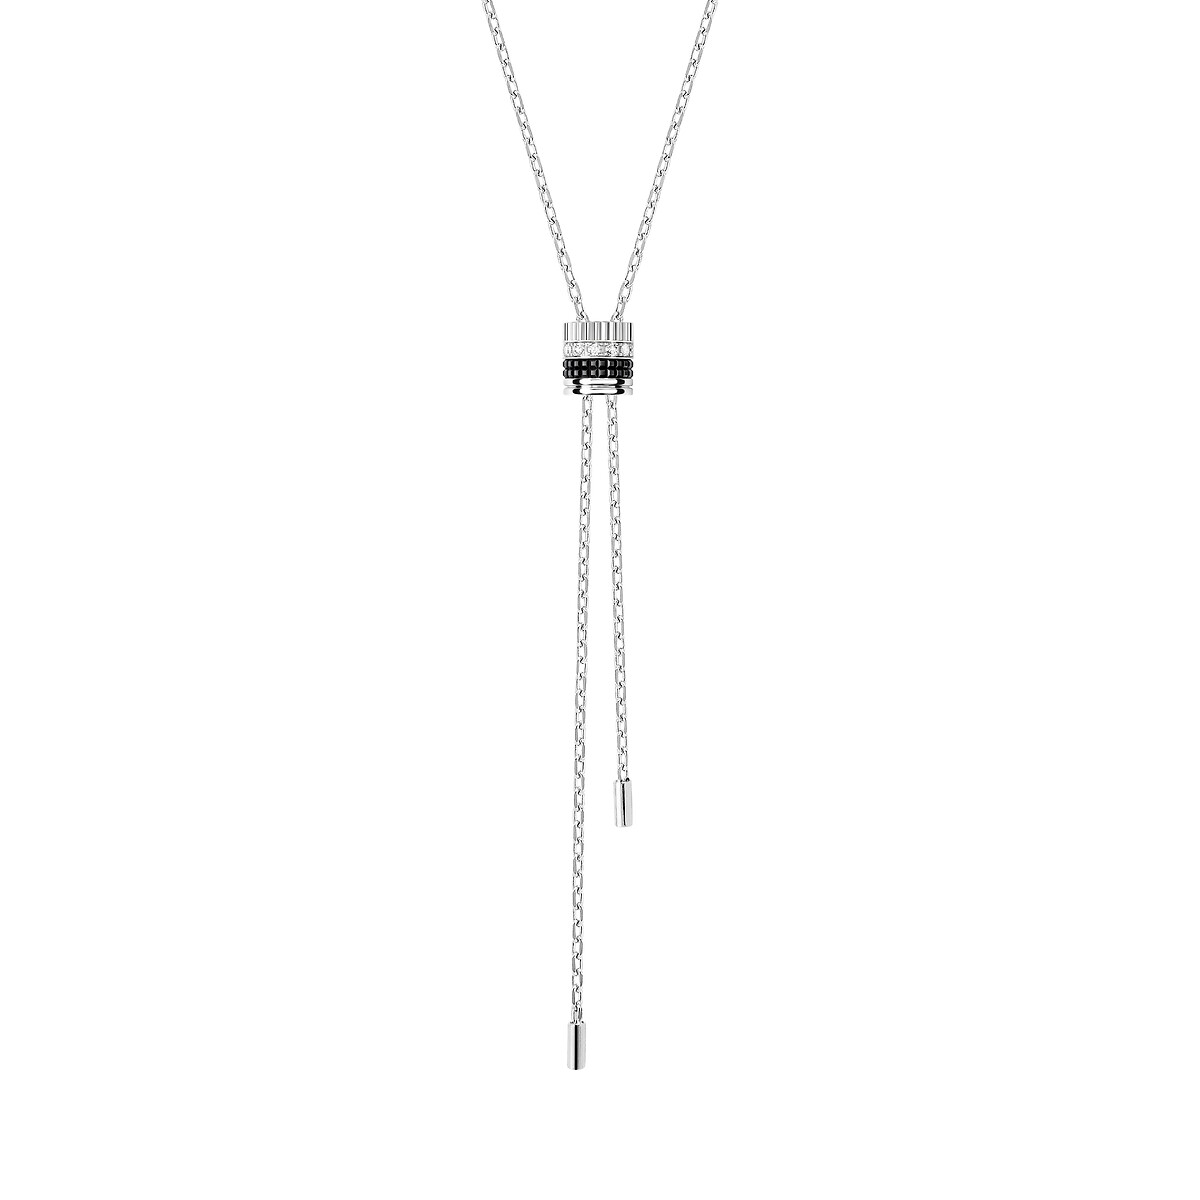 First product packshot Quatre Black Edition tie necklace, small model